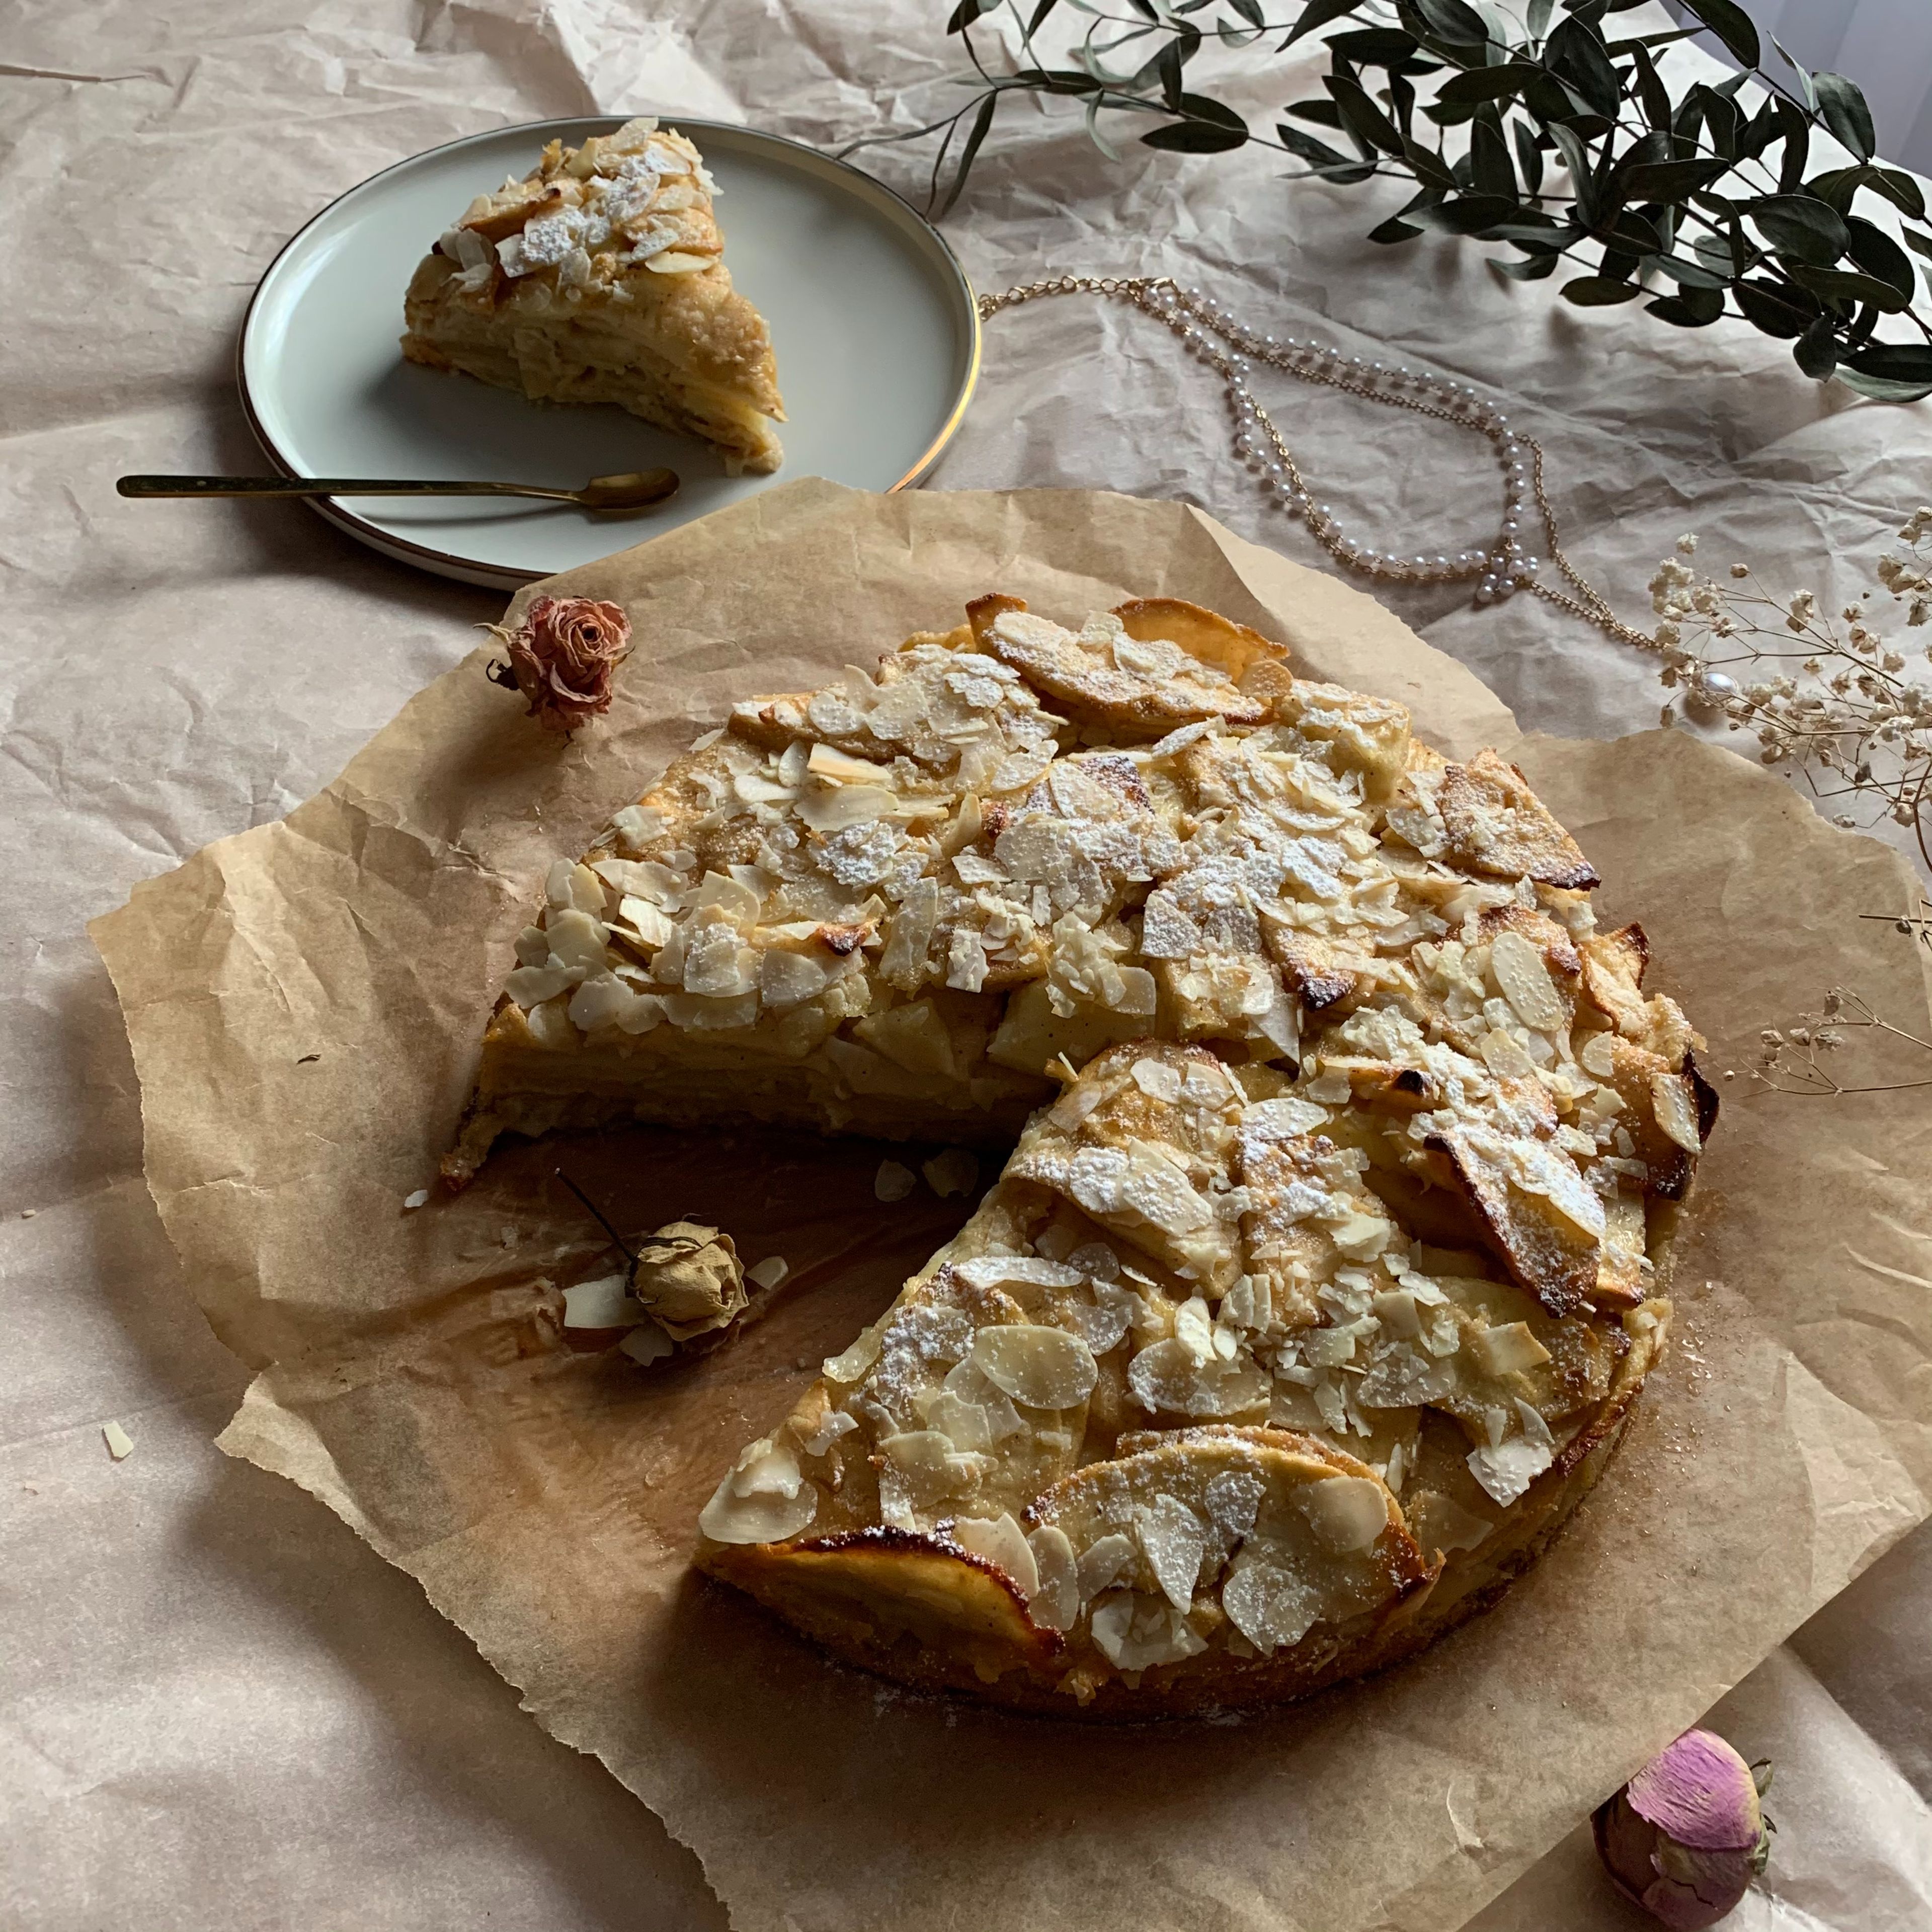 Last step is to decorate your pie with almond flakes and put it in the oven for 45 min (180℃). That's it!